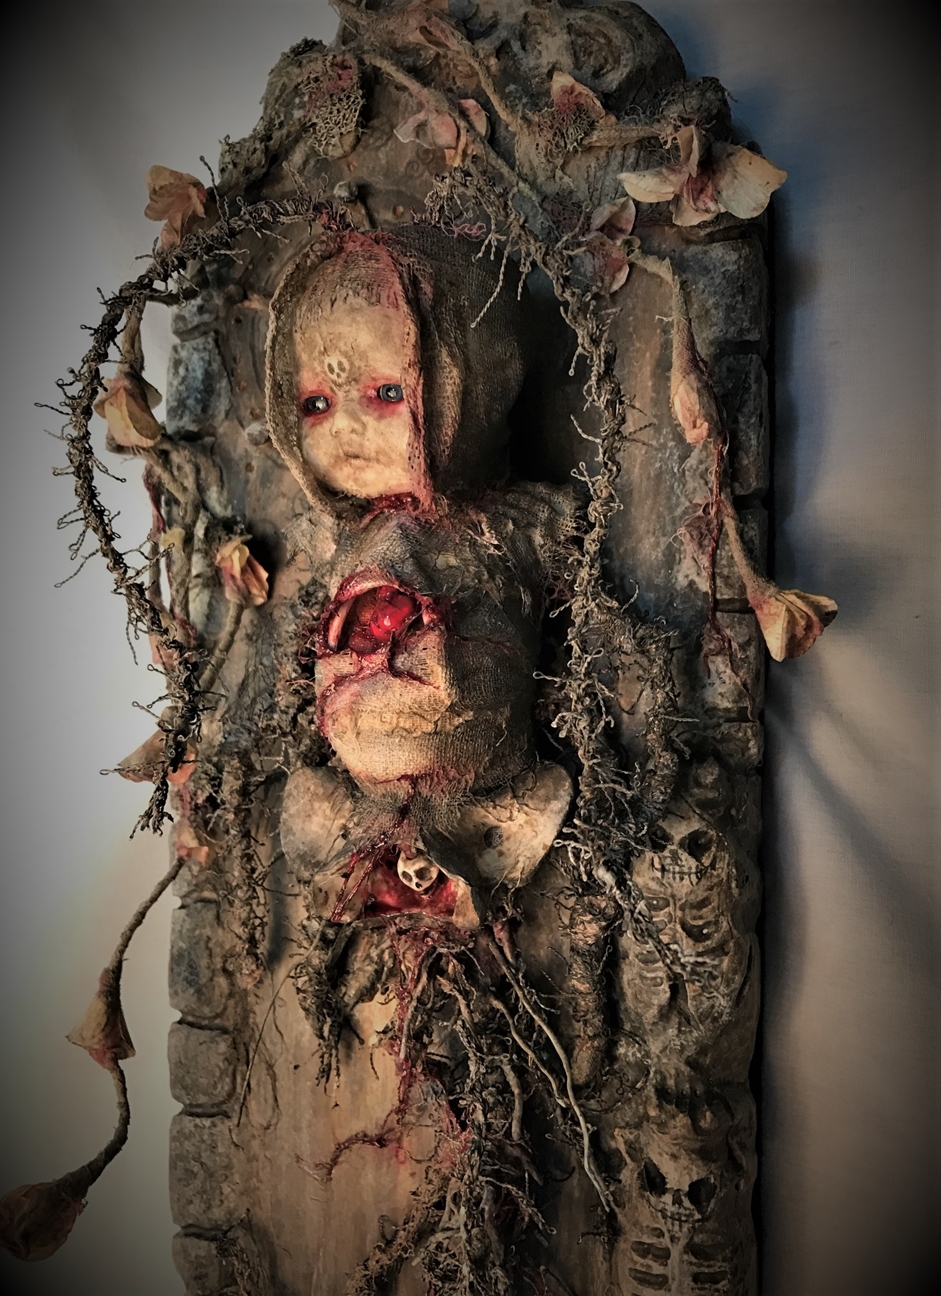 mixed media assemblage ghostly repainted baby doll mounted on wooden board dark art doll split bleeding chest